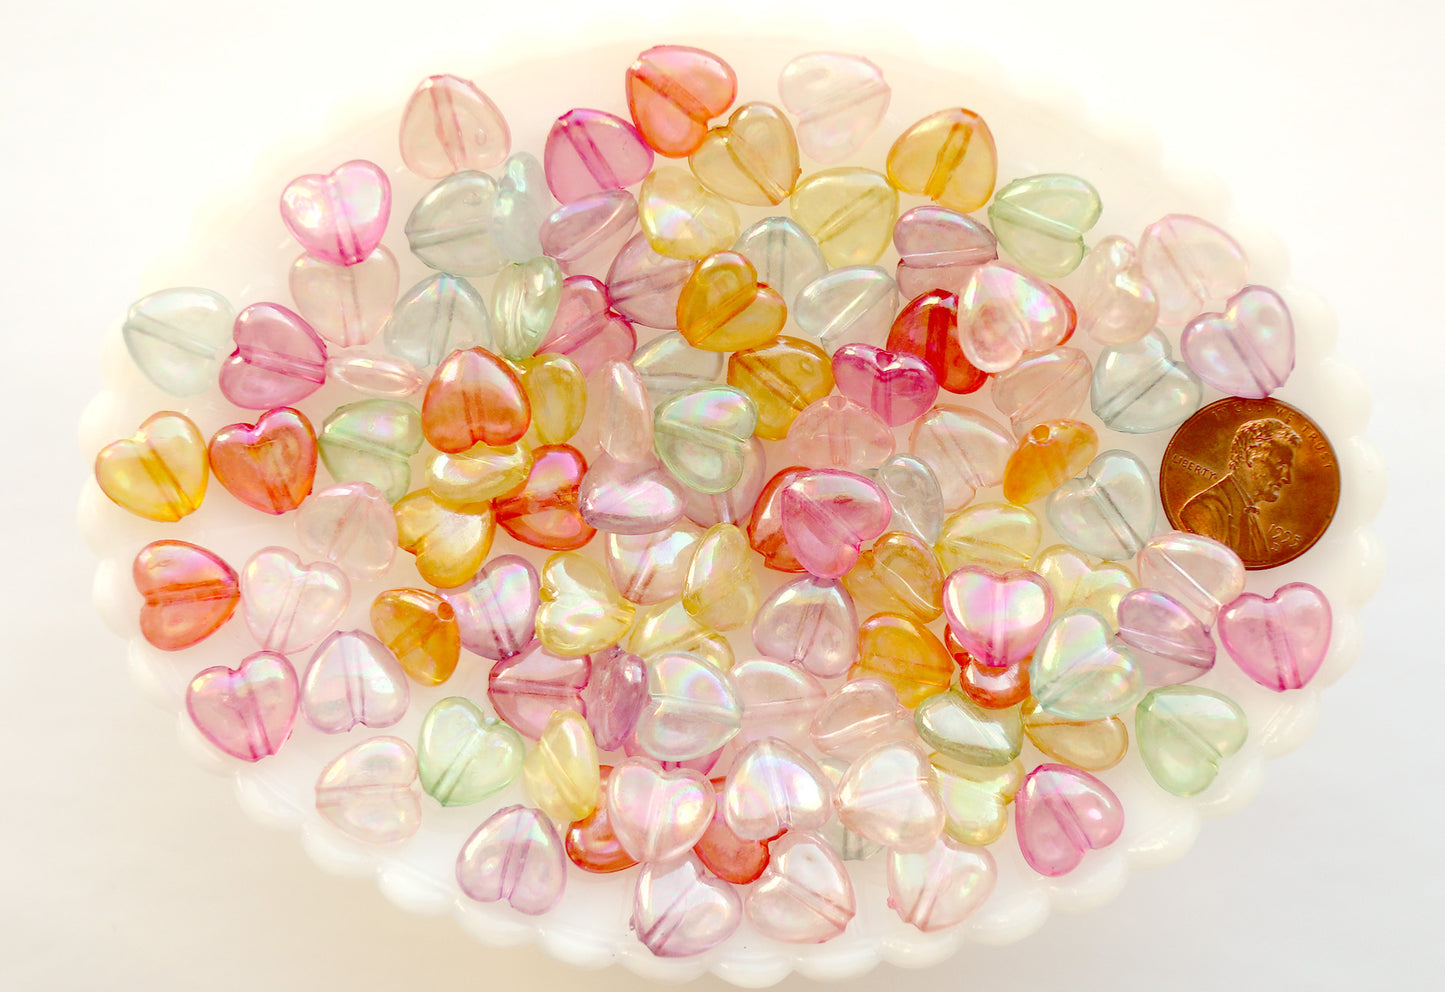 Heart Beads - 11mm AB Transparent Iridescent Puffy Heart Acrylic or Resin Beads - 100 pcs set